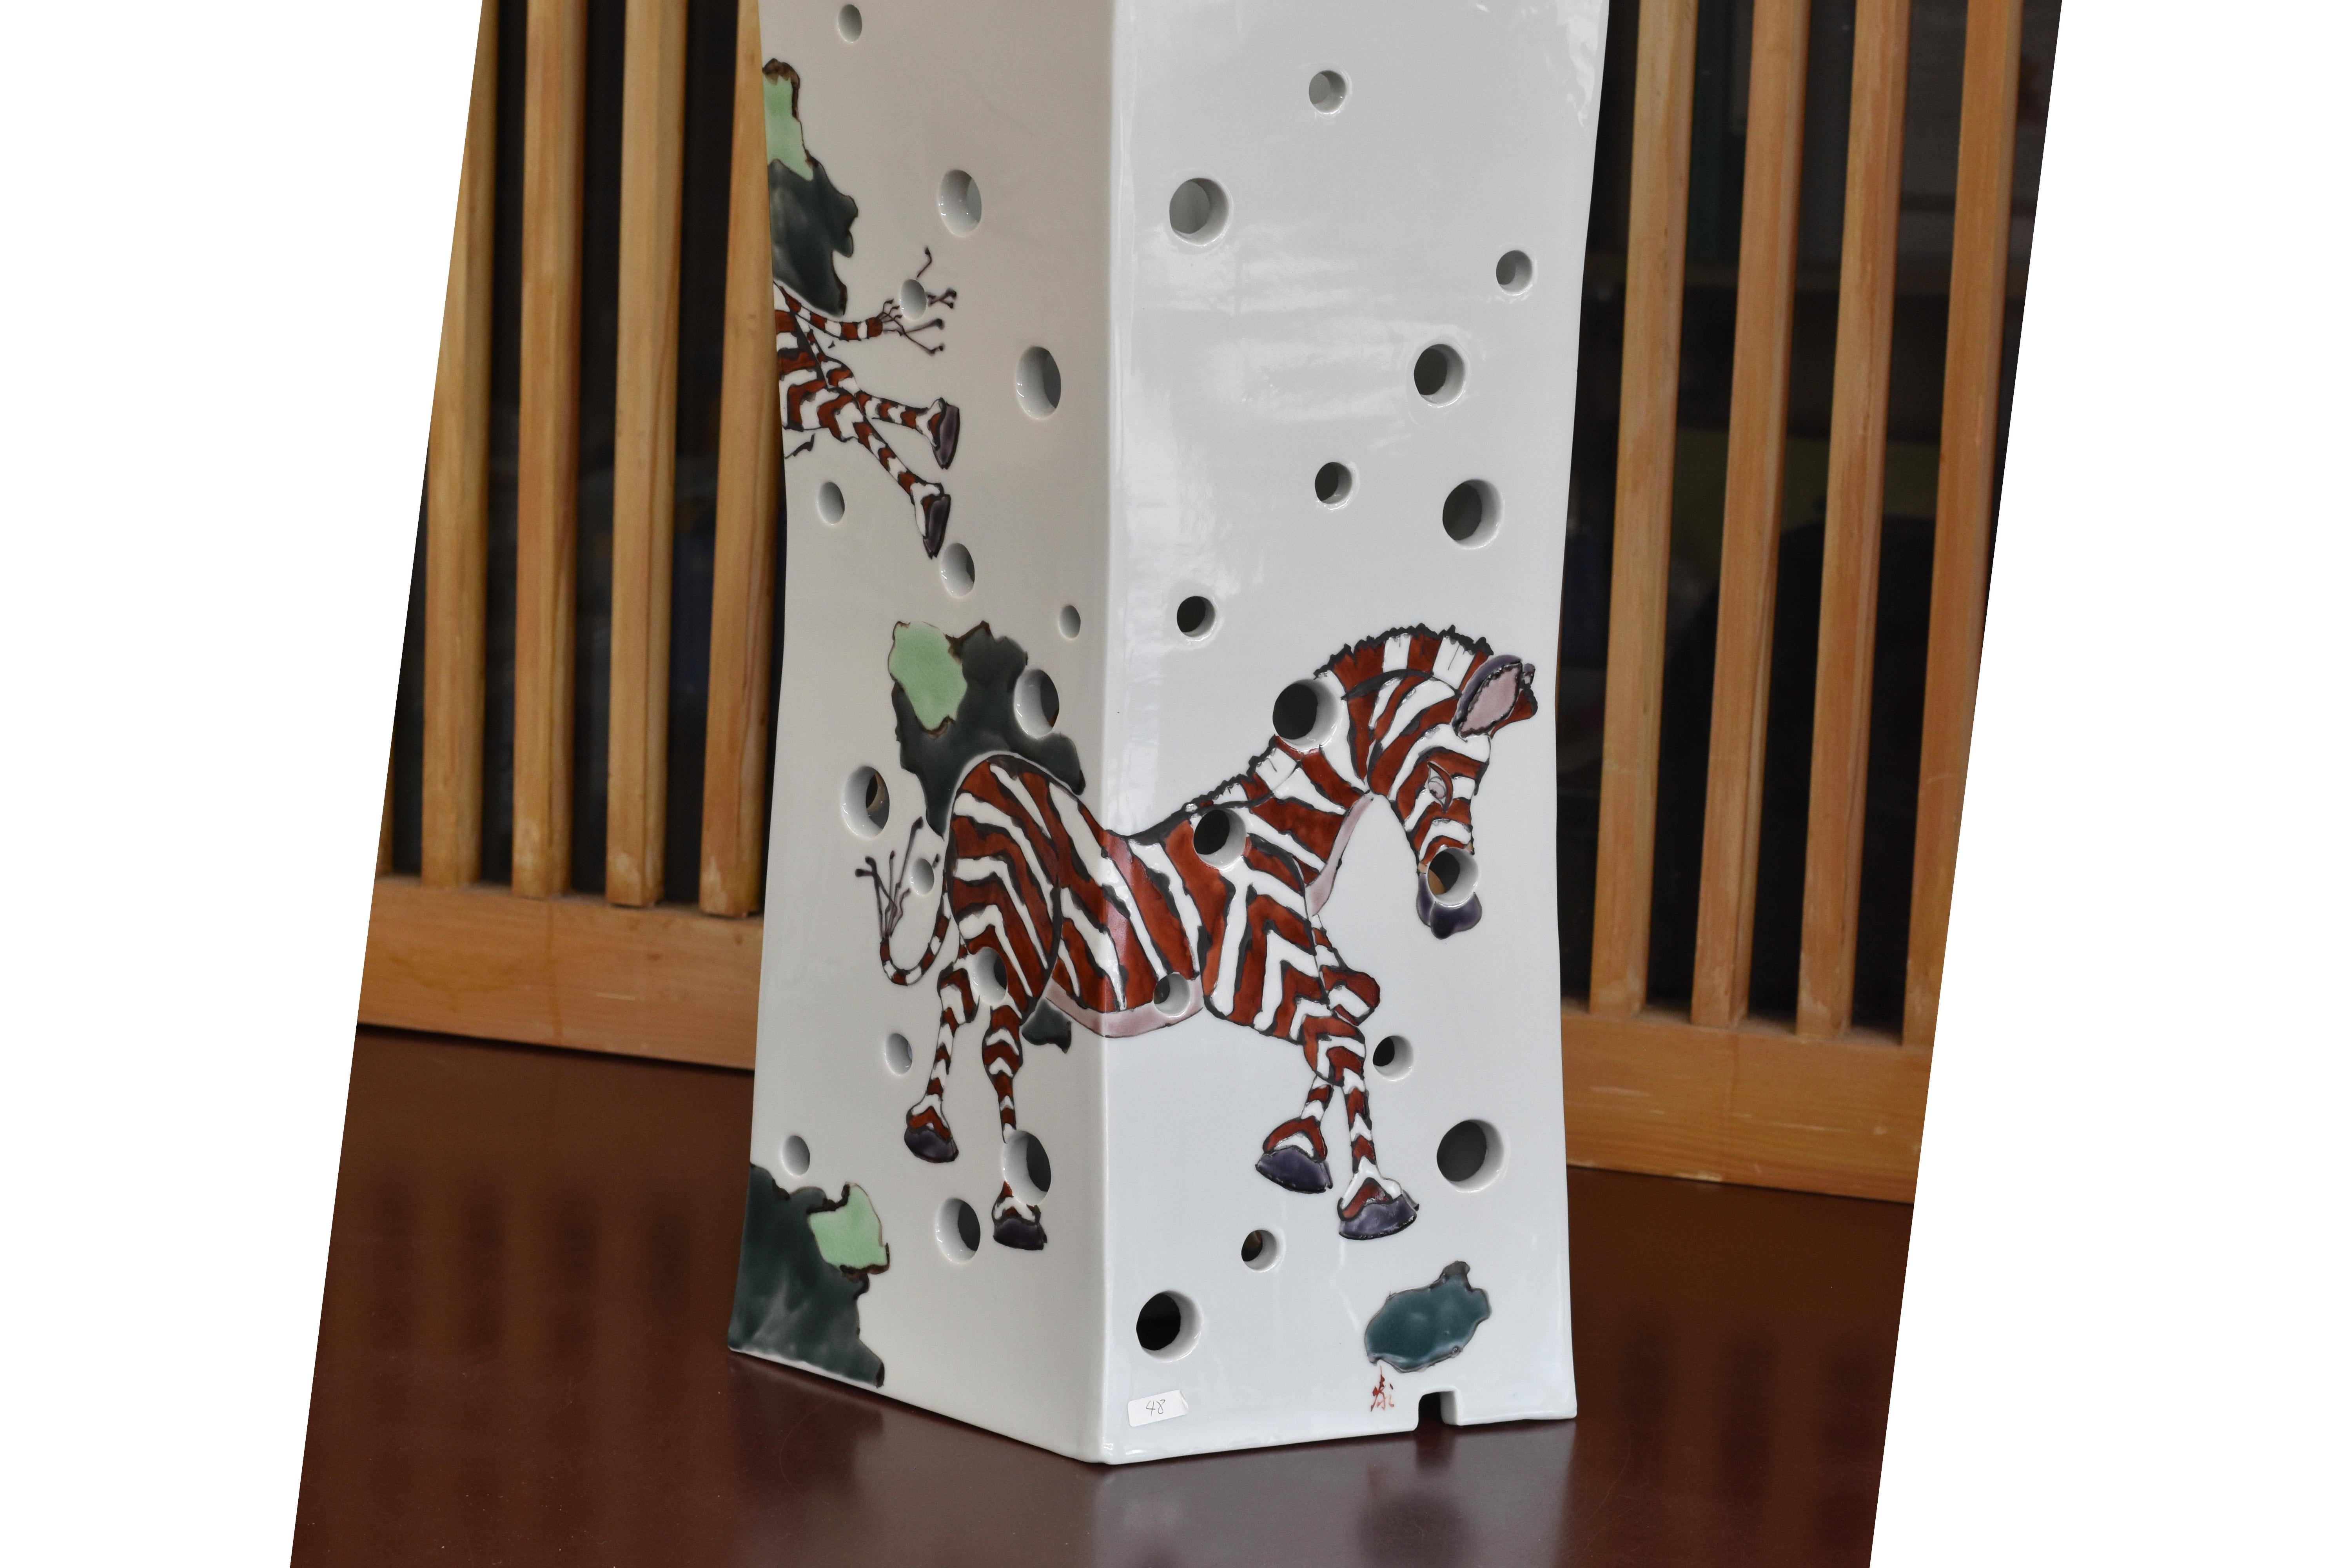 Exquisite museum quality contemporary Japanese hand-painted porcelain signed vase/lamp in an elegant rectangular shape, with his unique signature interpretation of zebras in a stunning chocolate brown. Depicted here on the surface of this striking